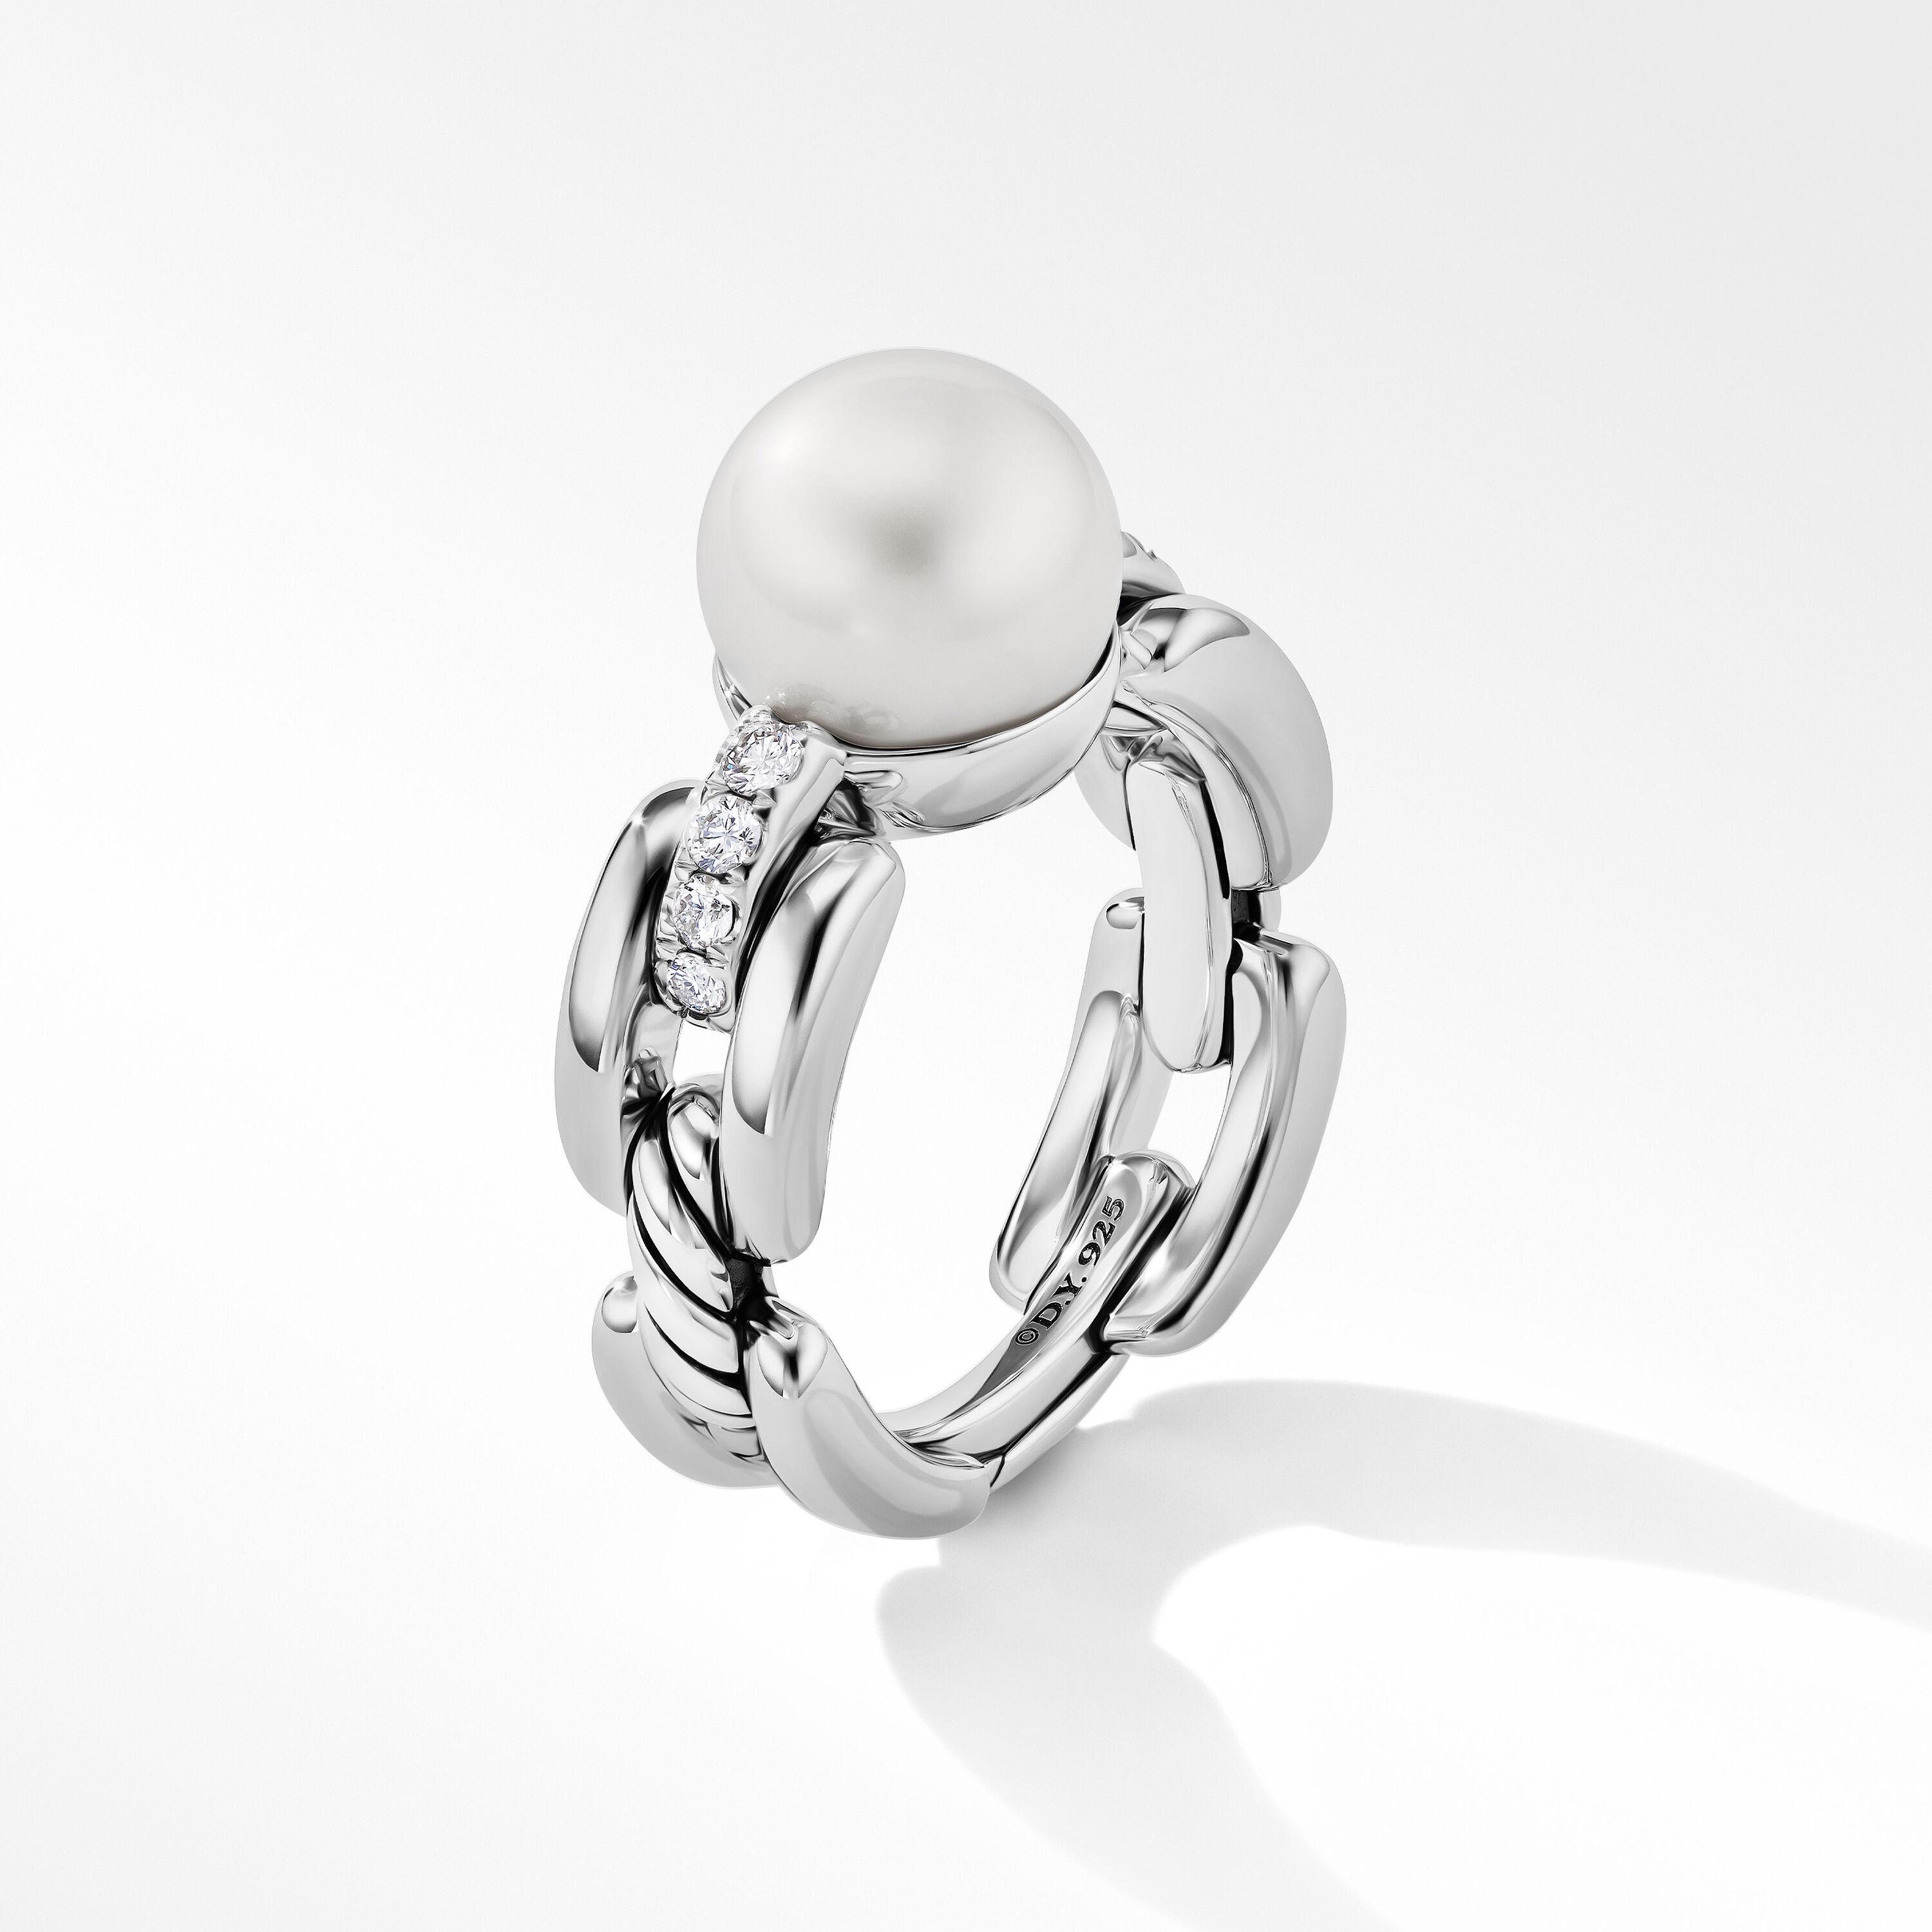 David Yurman DY Madison Pearl Ring in Sterling Silver with Pave Diamonds, size 6 1